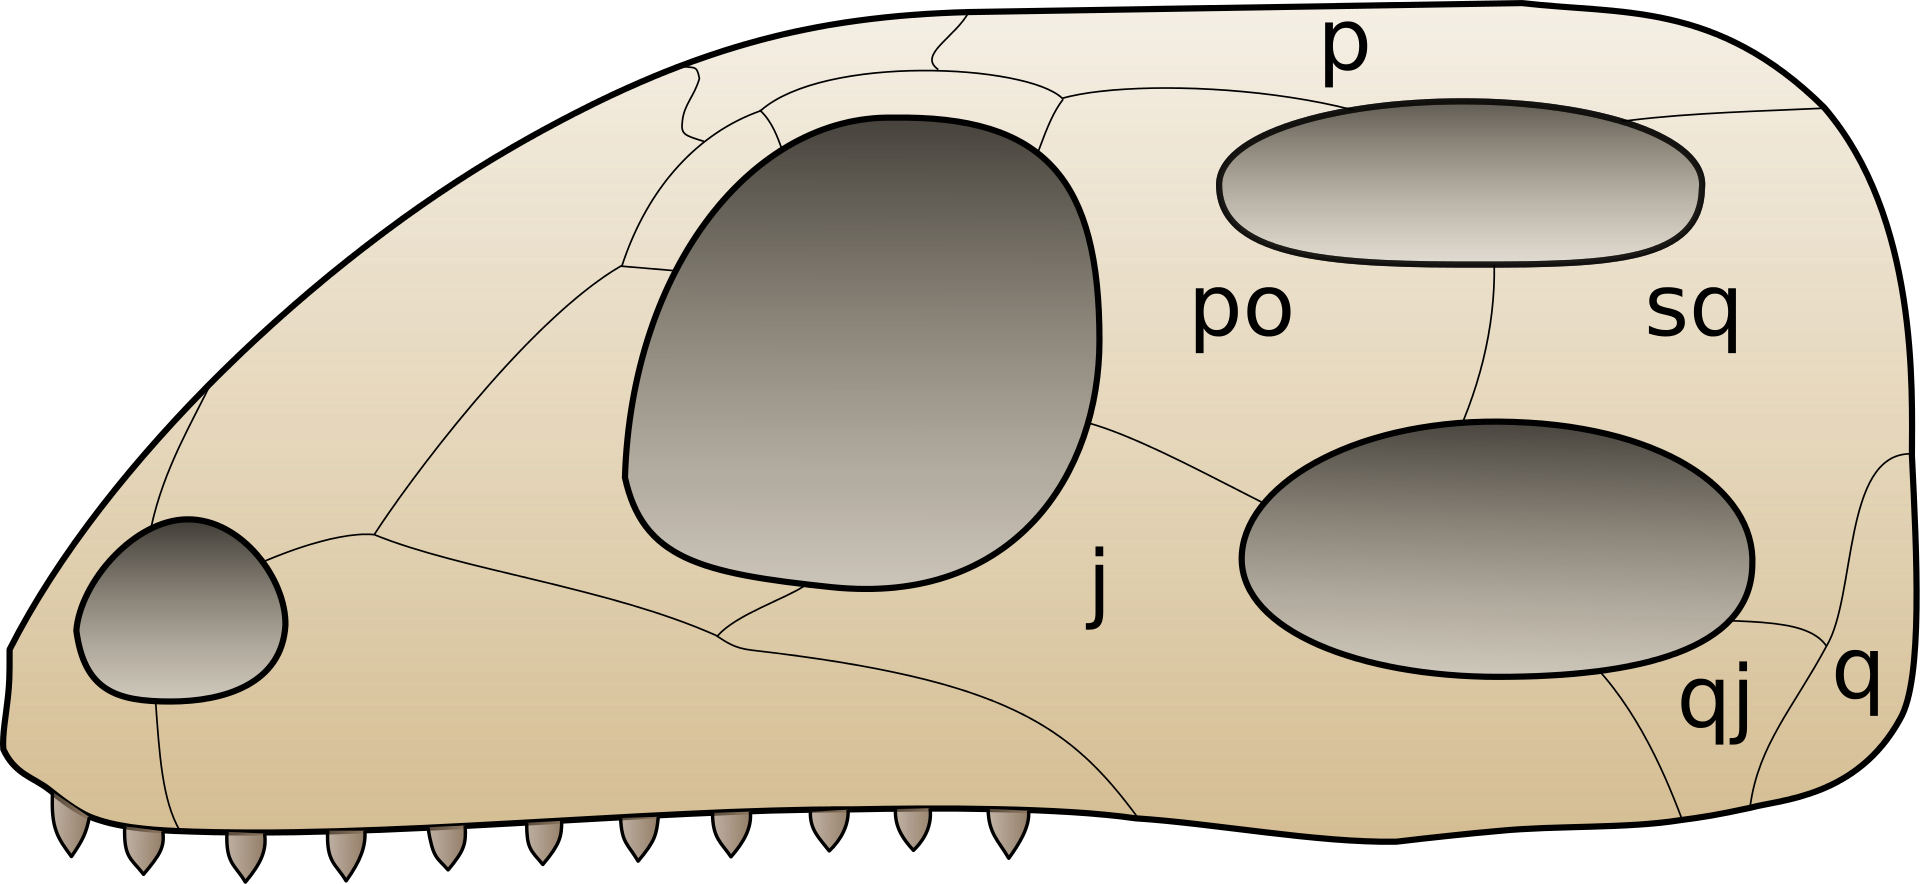 The skull of Diapsids